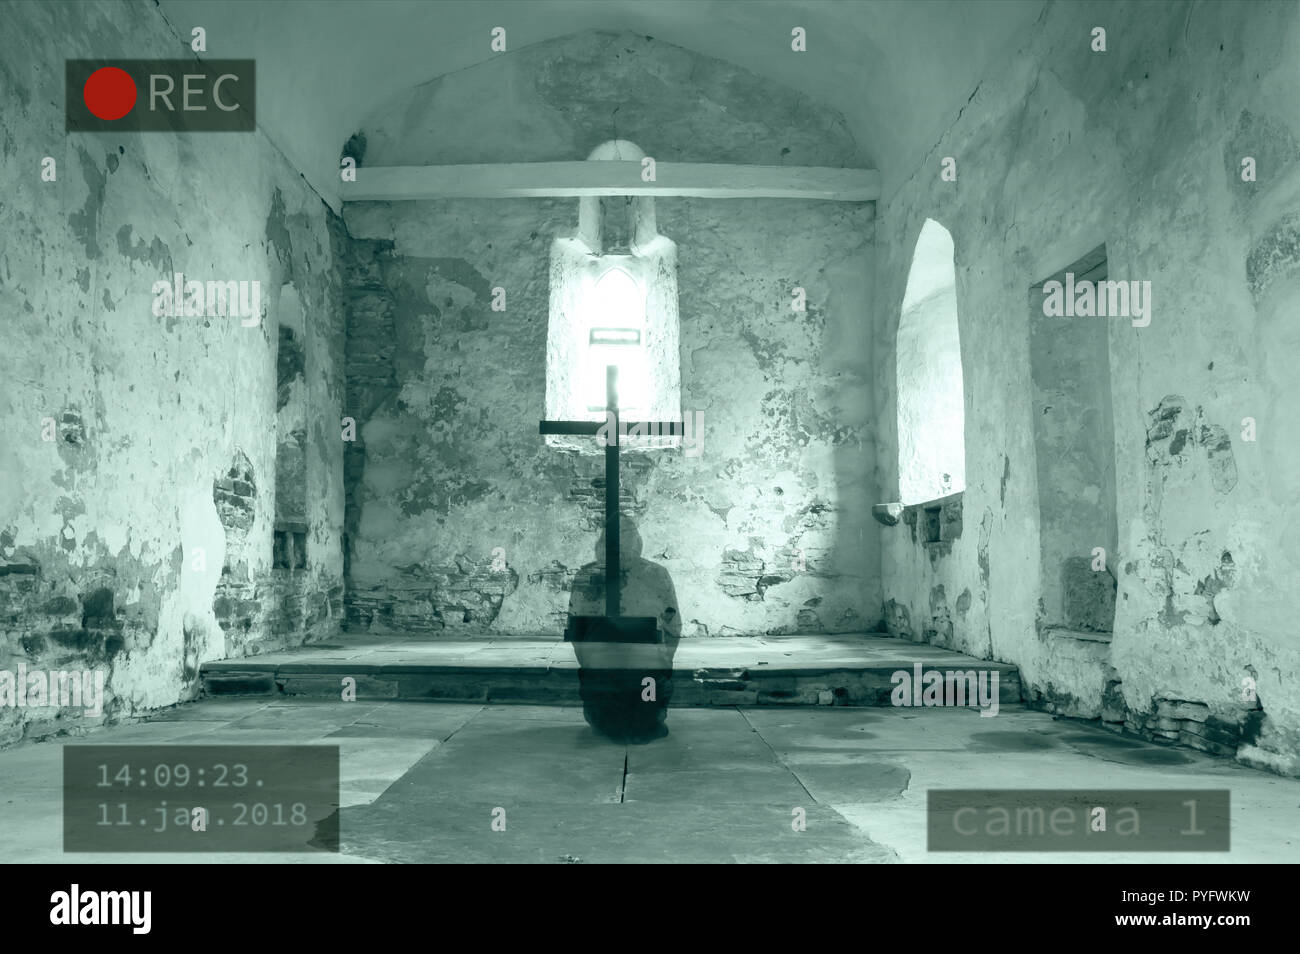 A hooded ghost kneeling next to a cross in a disused church. With a photoshopped edit of a security camera. Stock Photo